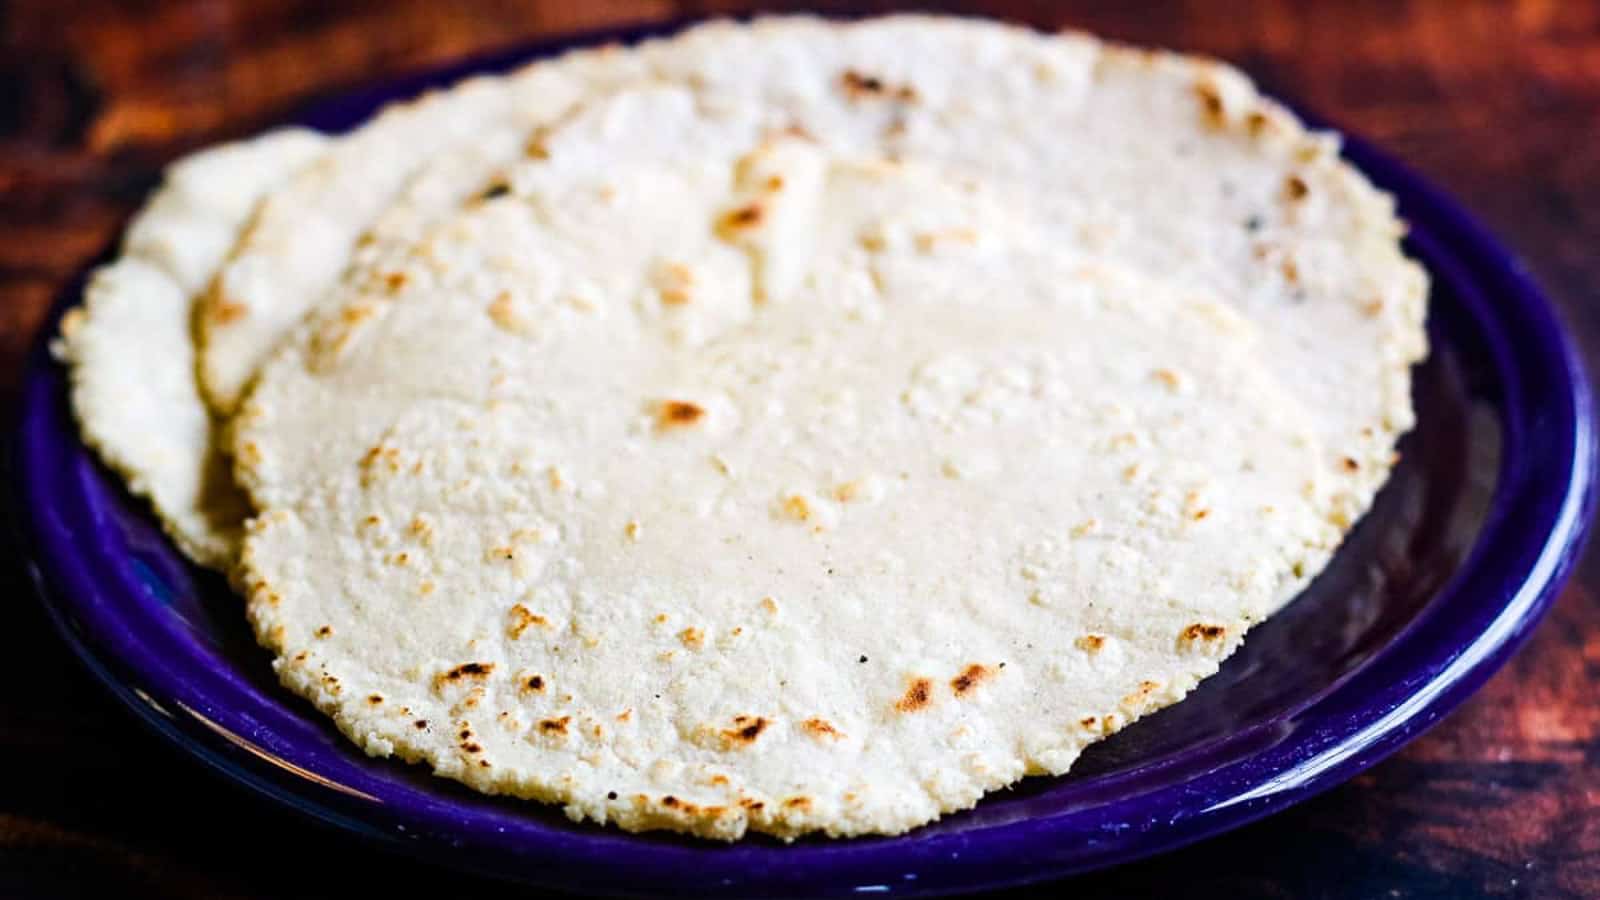 Stack of corn tortillas on a purple plate.